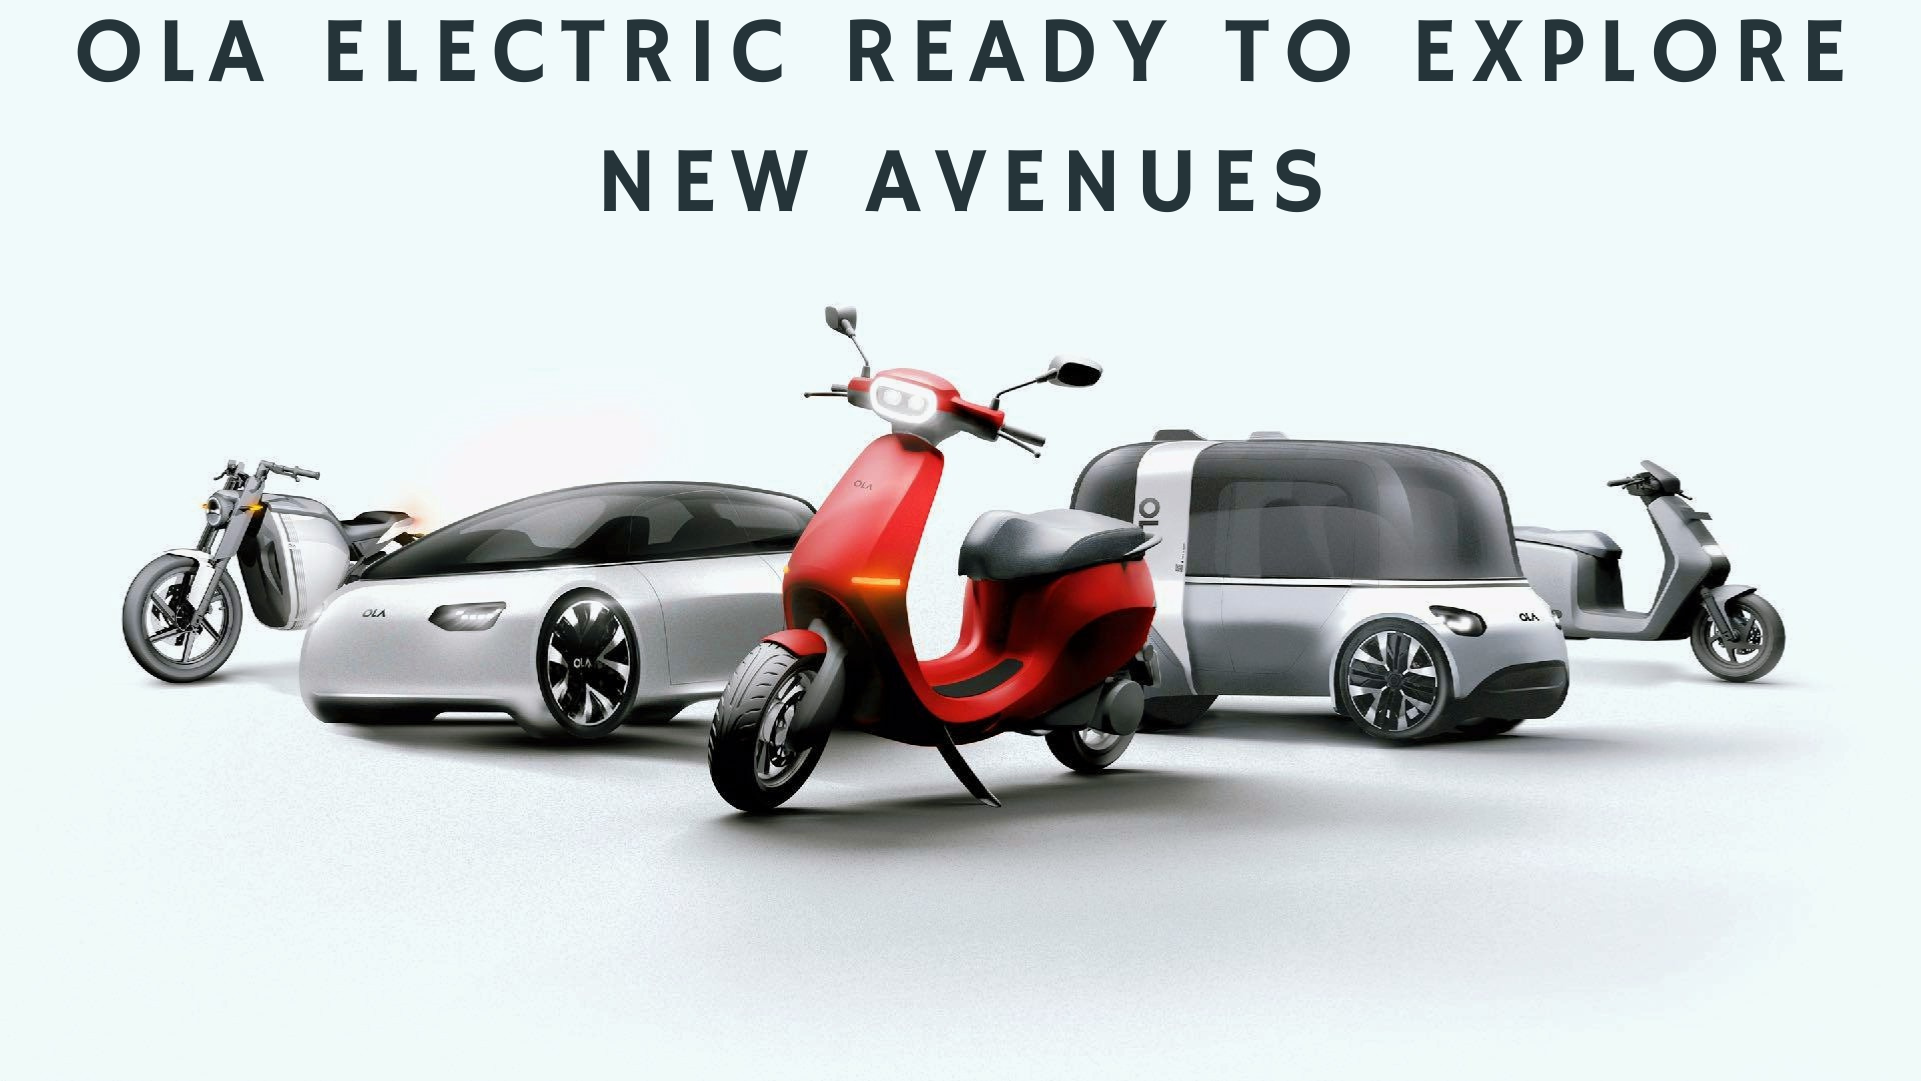 Bhavish Aggarwal Shared Future product Lineup for Ola Electric